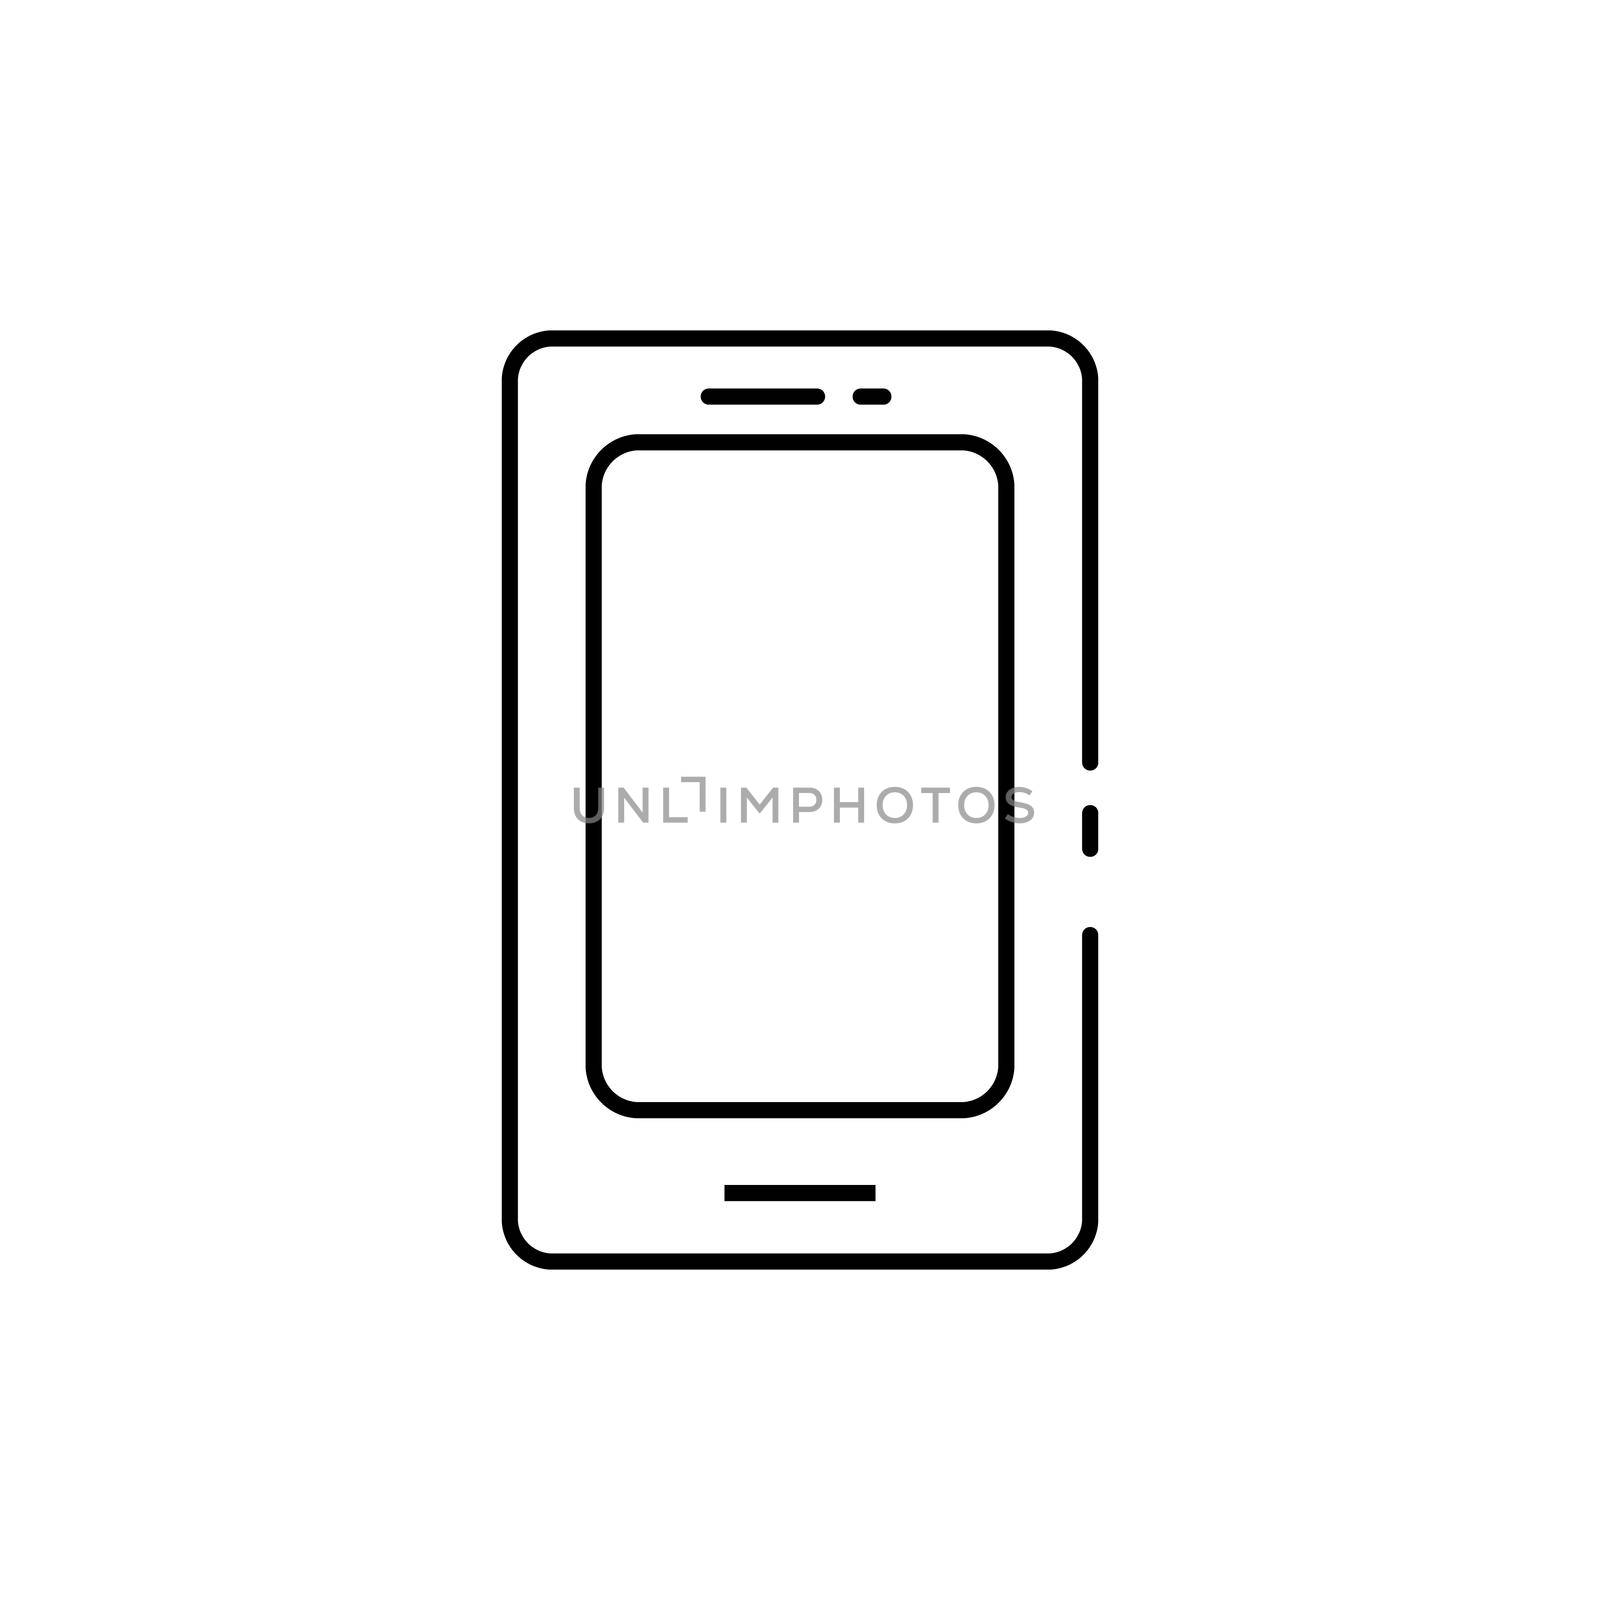 phone, smartphone, communication line icon. elements of airport, travel illustration icons. signs, symbols can be used for web, logo, mobile app, UI, UX on white background